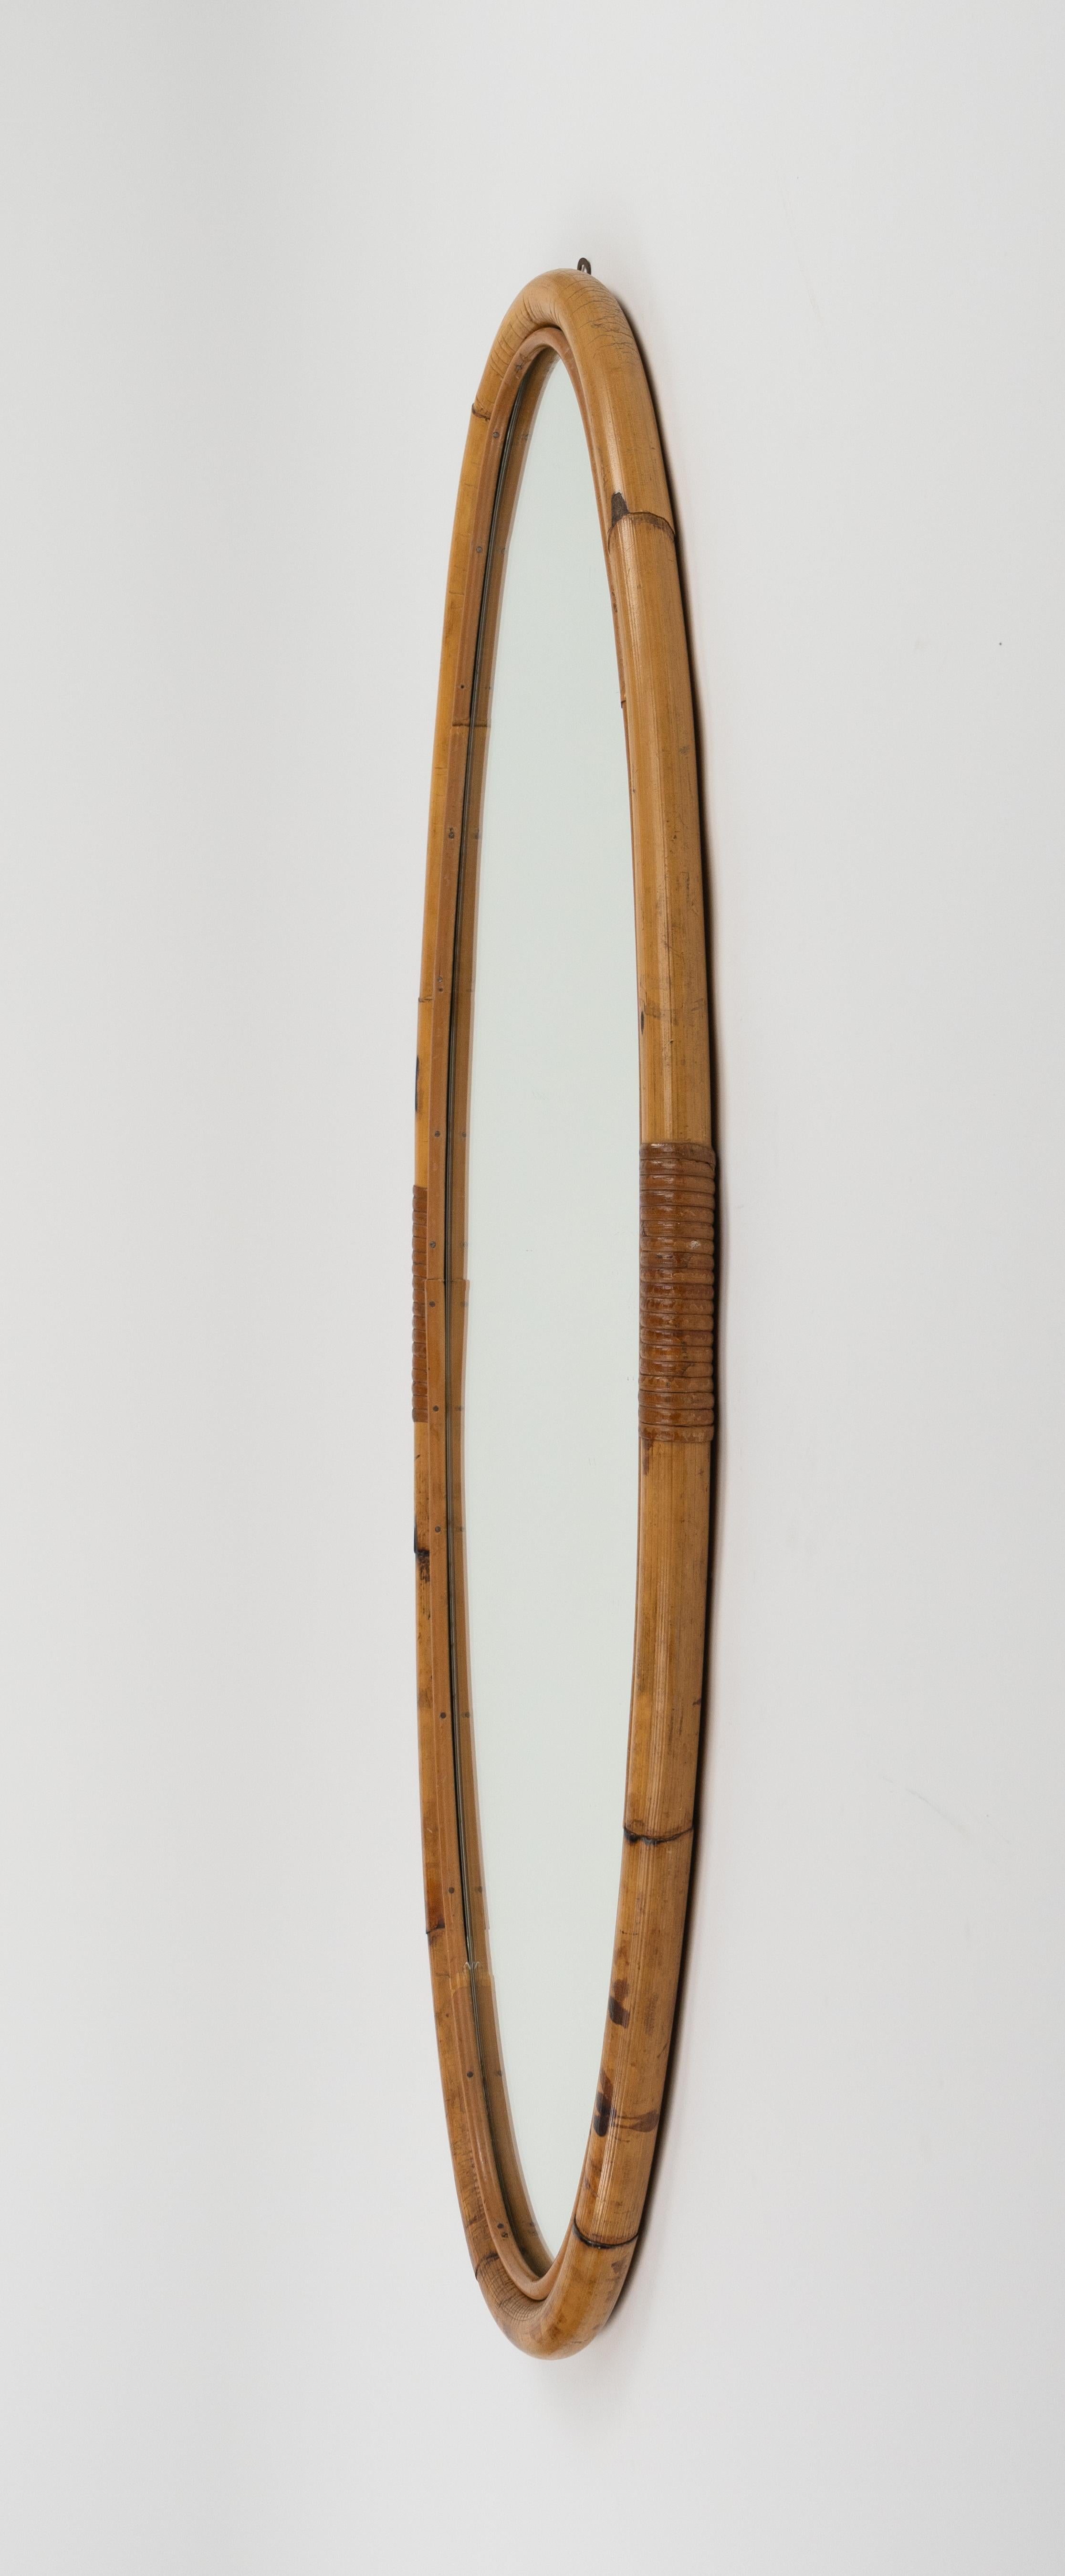 Midcentury Bamboo and Rattan Oval Wall Mirror, Italy 1970s For Sale 2